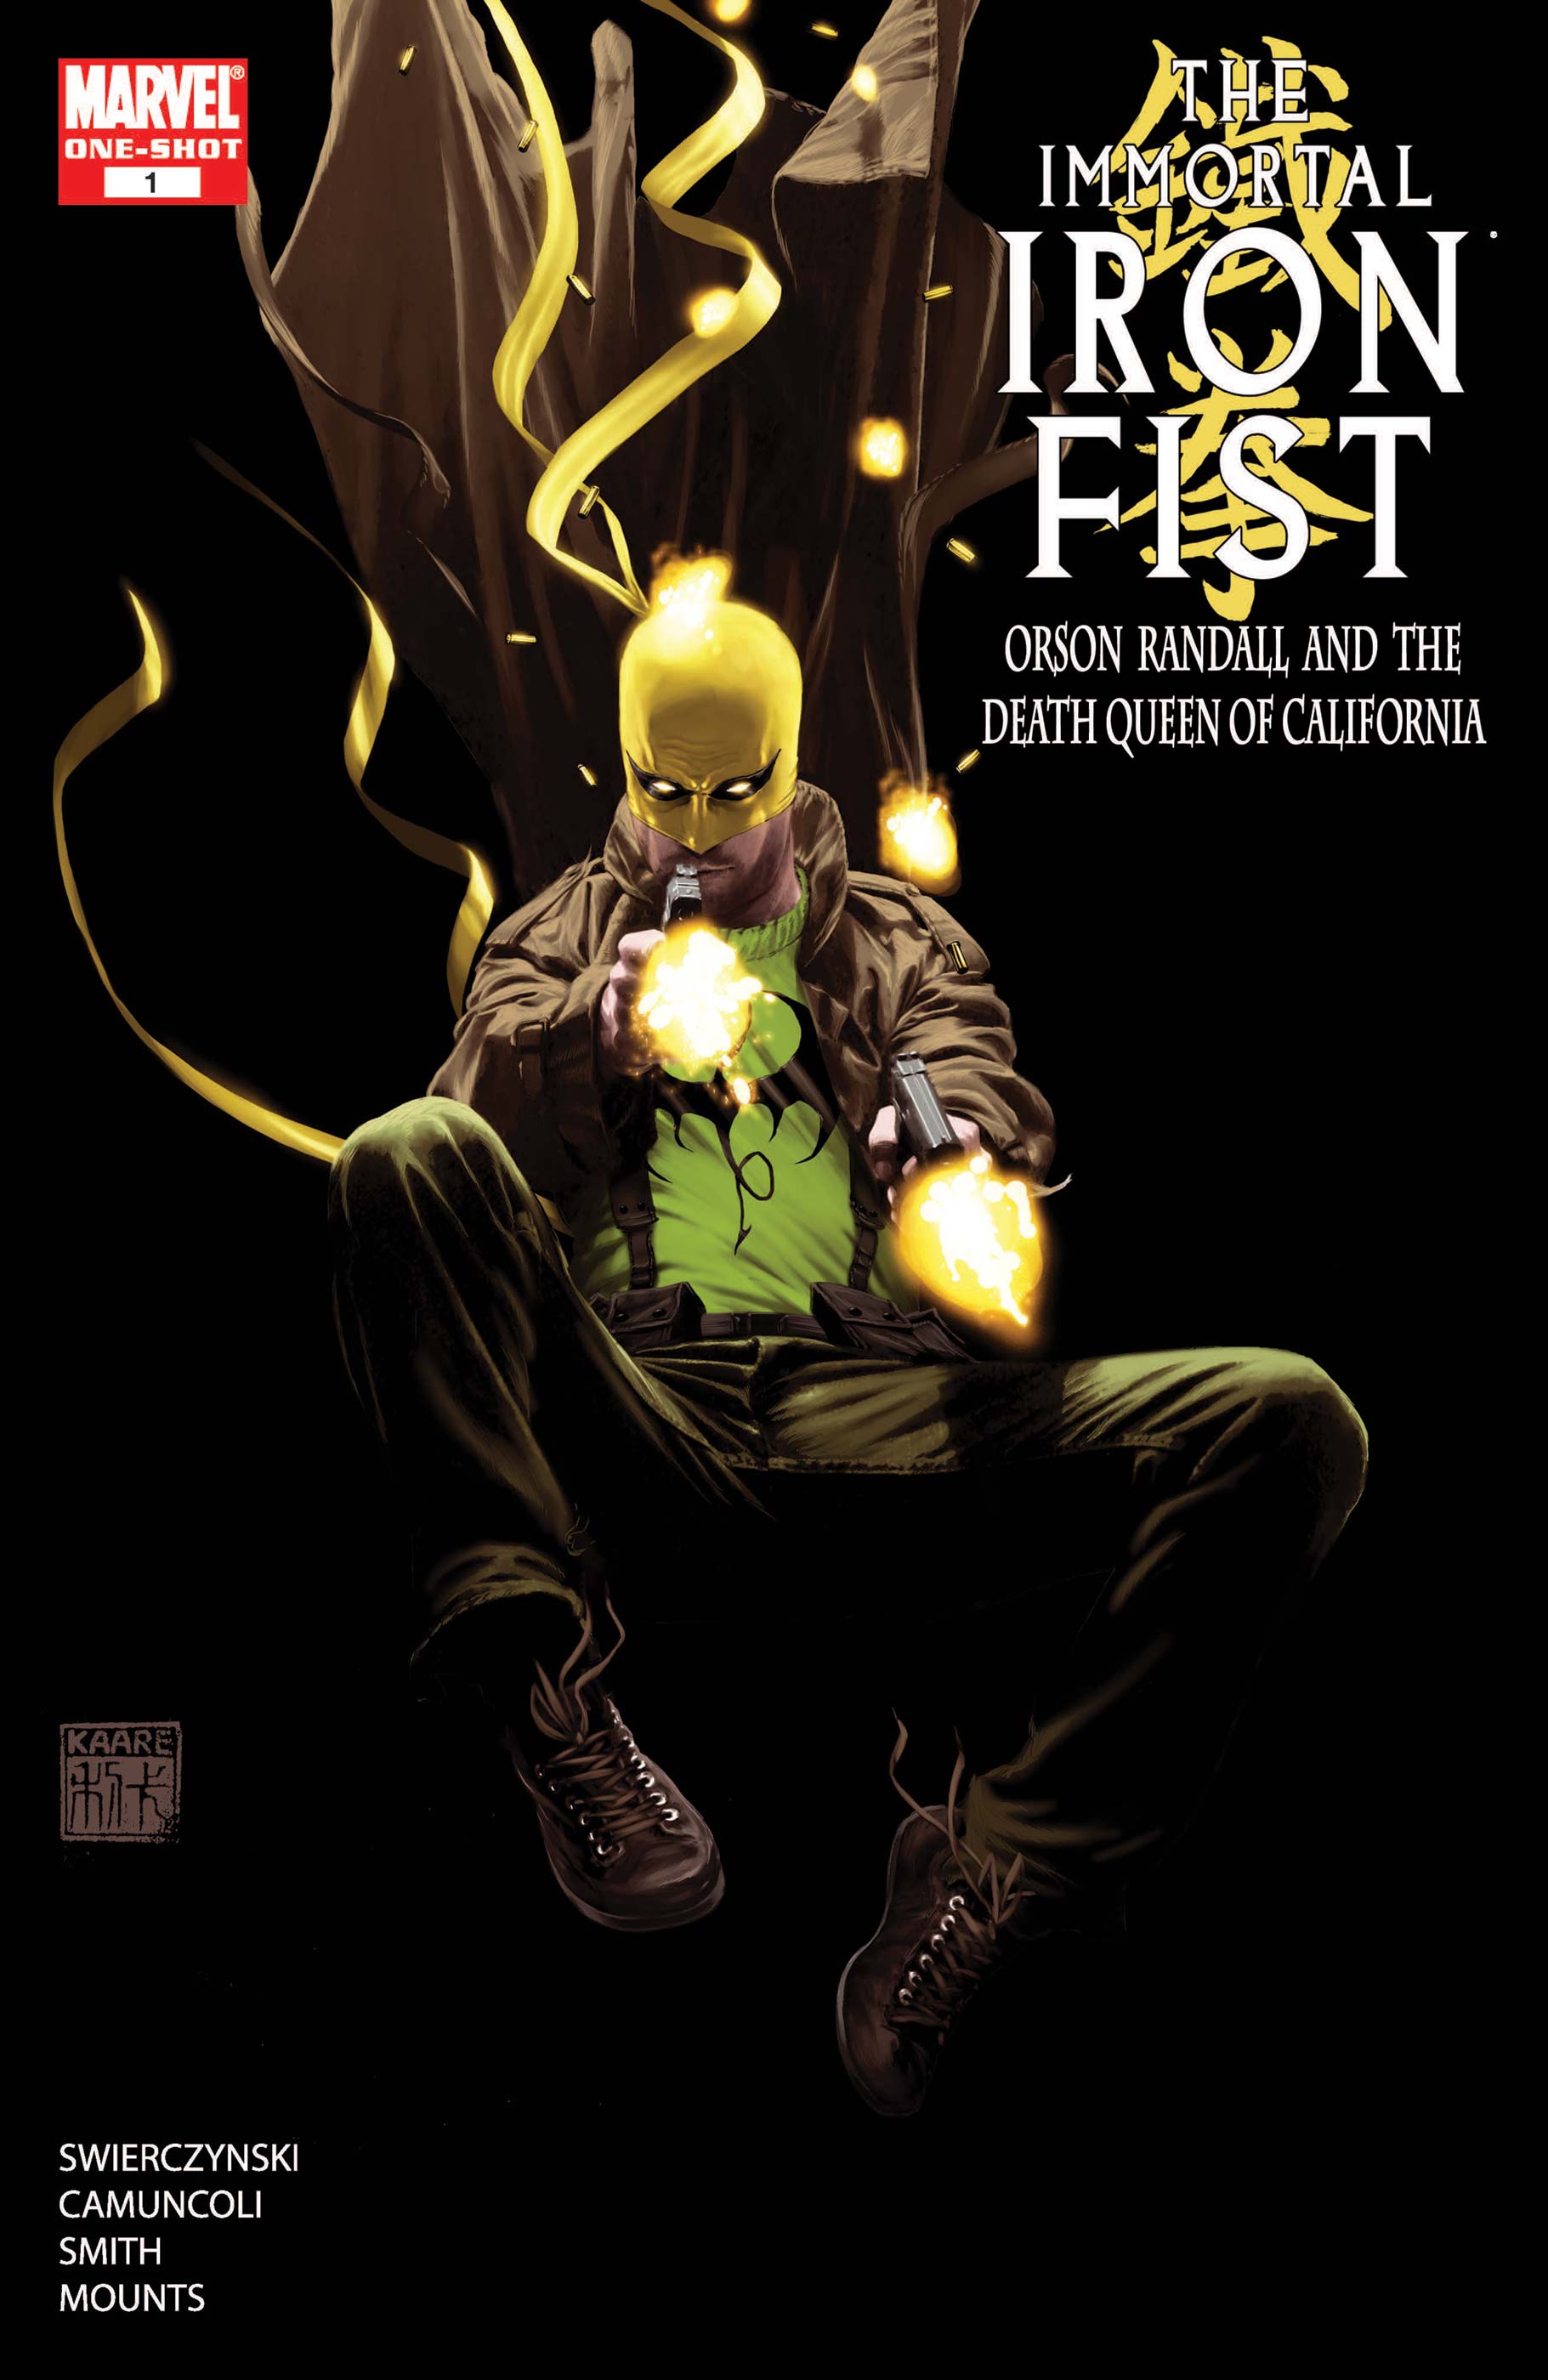 Immortal Iron Fist: Orson Randall and the Death Queen of California (2008) #1